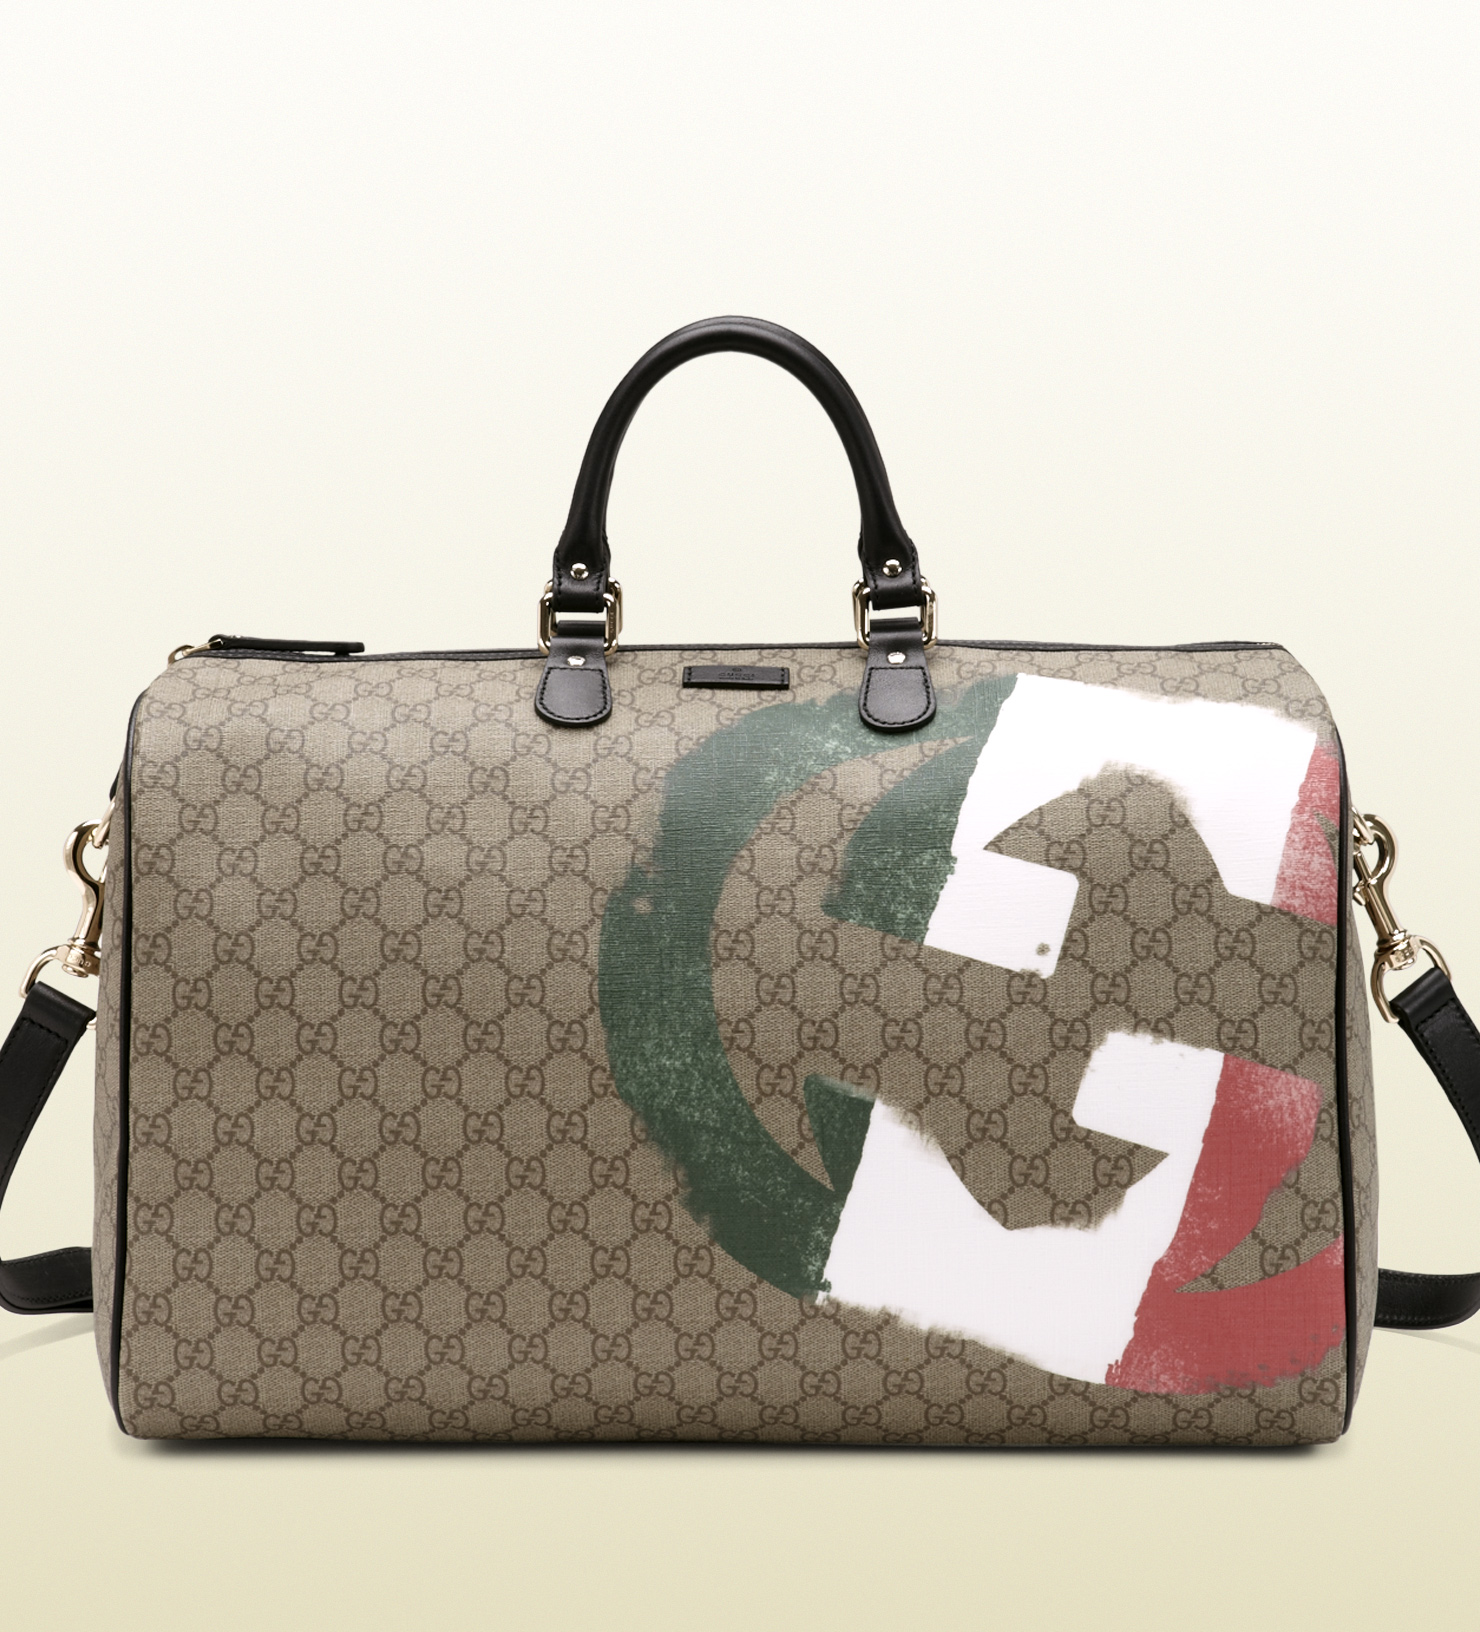 Lyst - Gucci Italy Gg Flag Collection Duffle Bag in Gray for Men